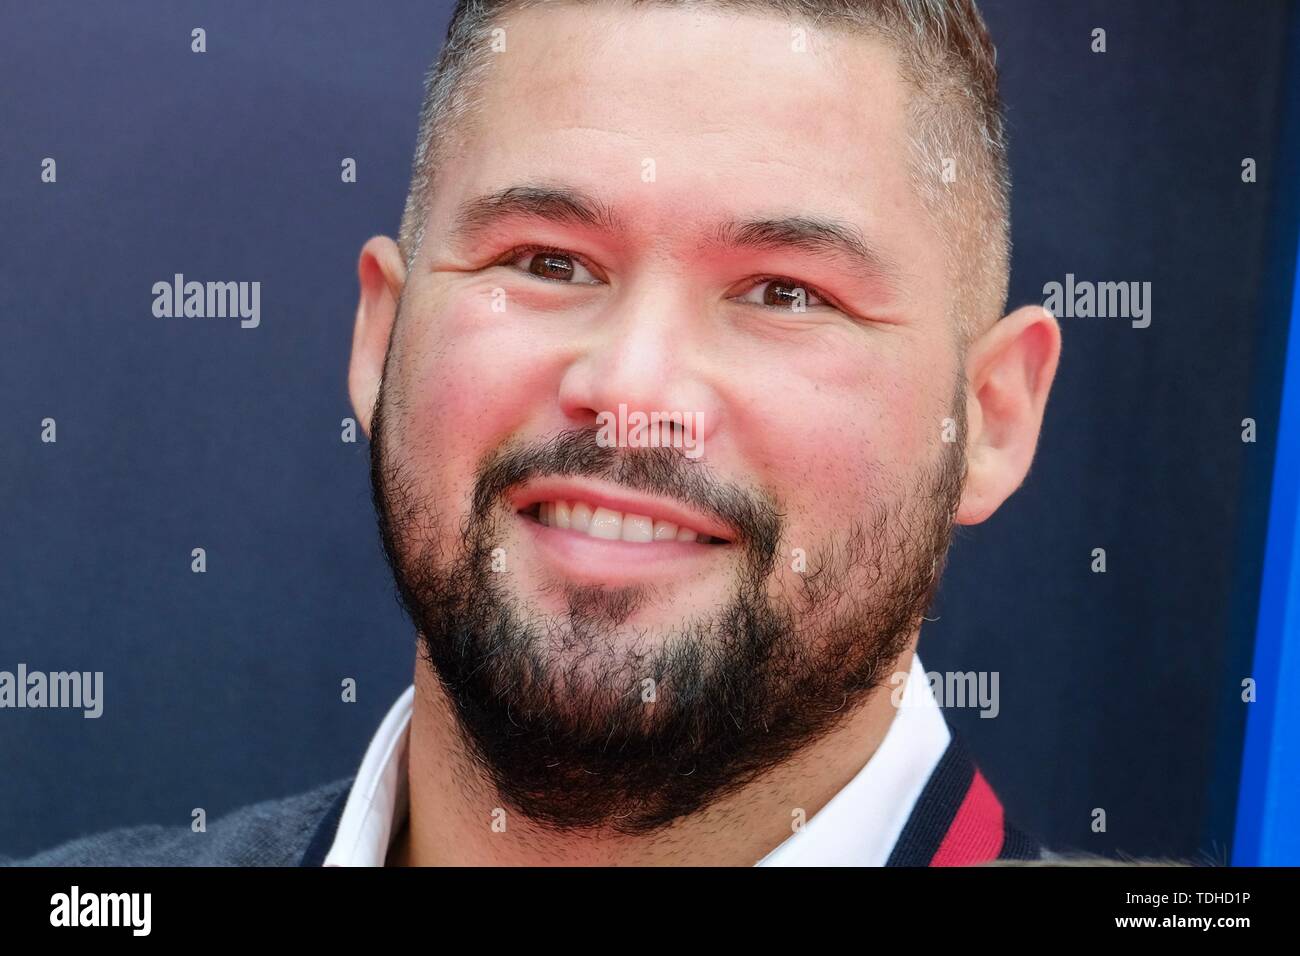 London, UK. 16th June 2019. Boxer Tony Bellew poses on the red carpet for the European premiere of Toy Story 4 held at the Odeon Luxe, Leicester Square, London on Sunday, Jun. 16, 2019 . Credit: Julie Edwards/Alamy Live News Stock Photo